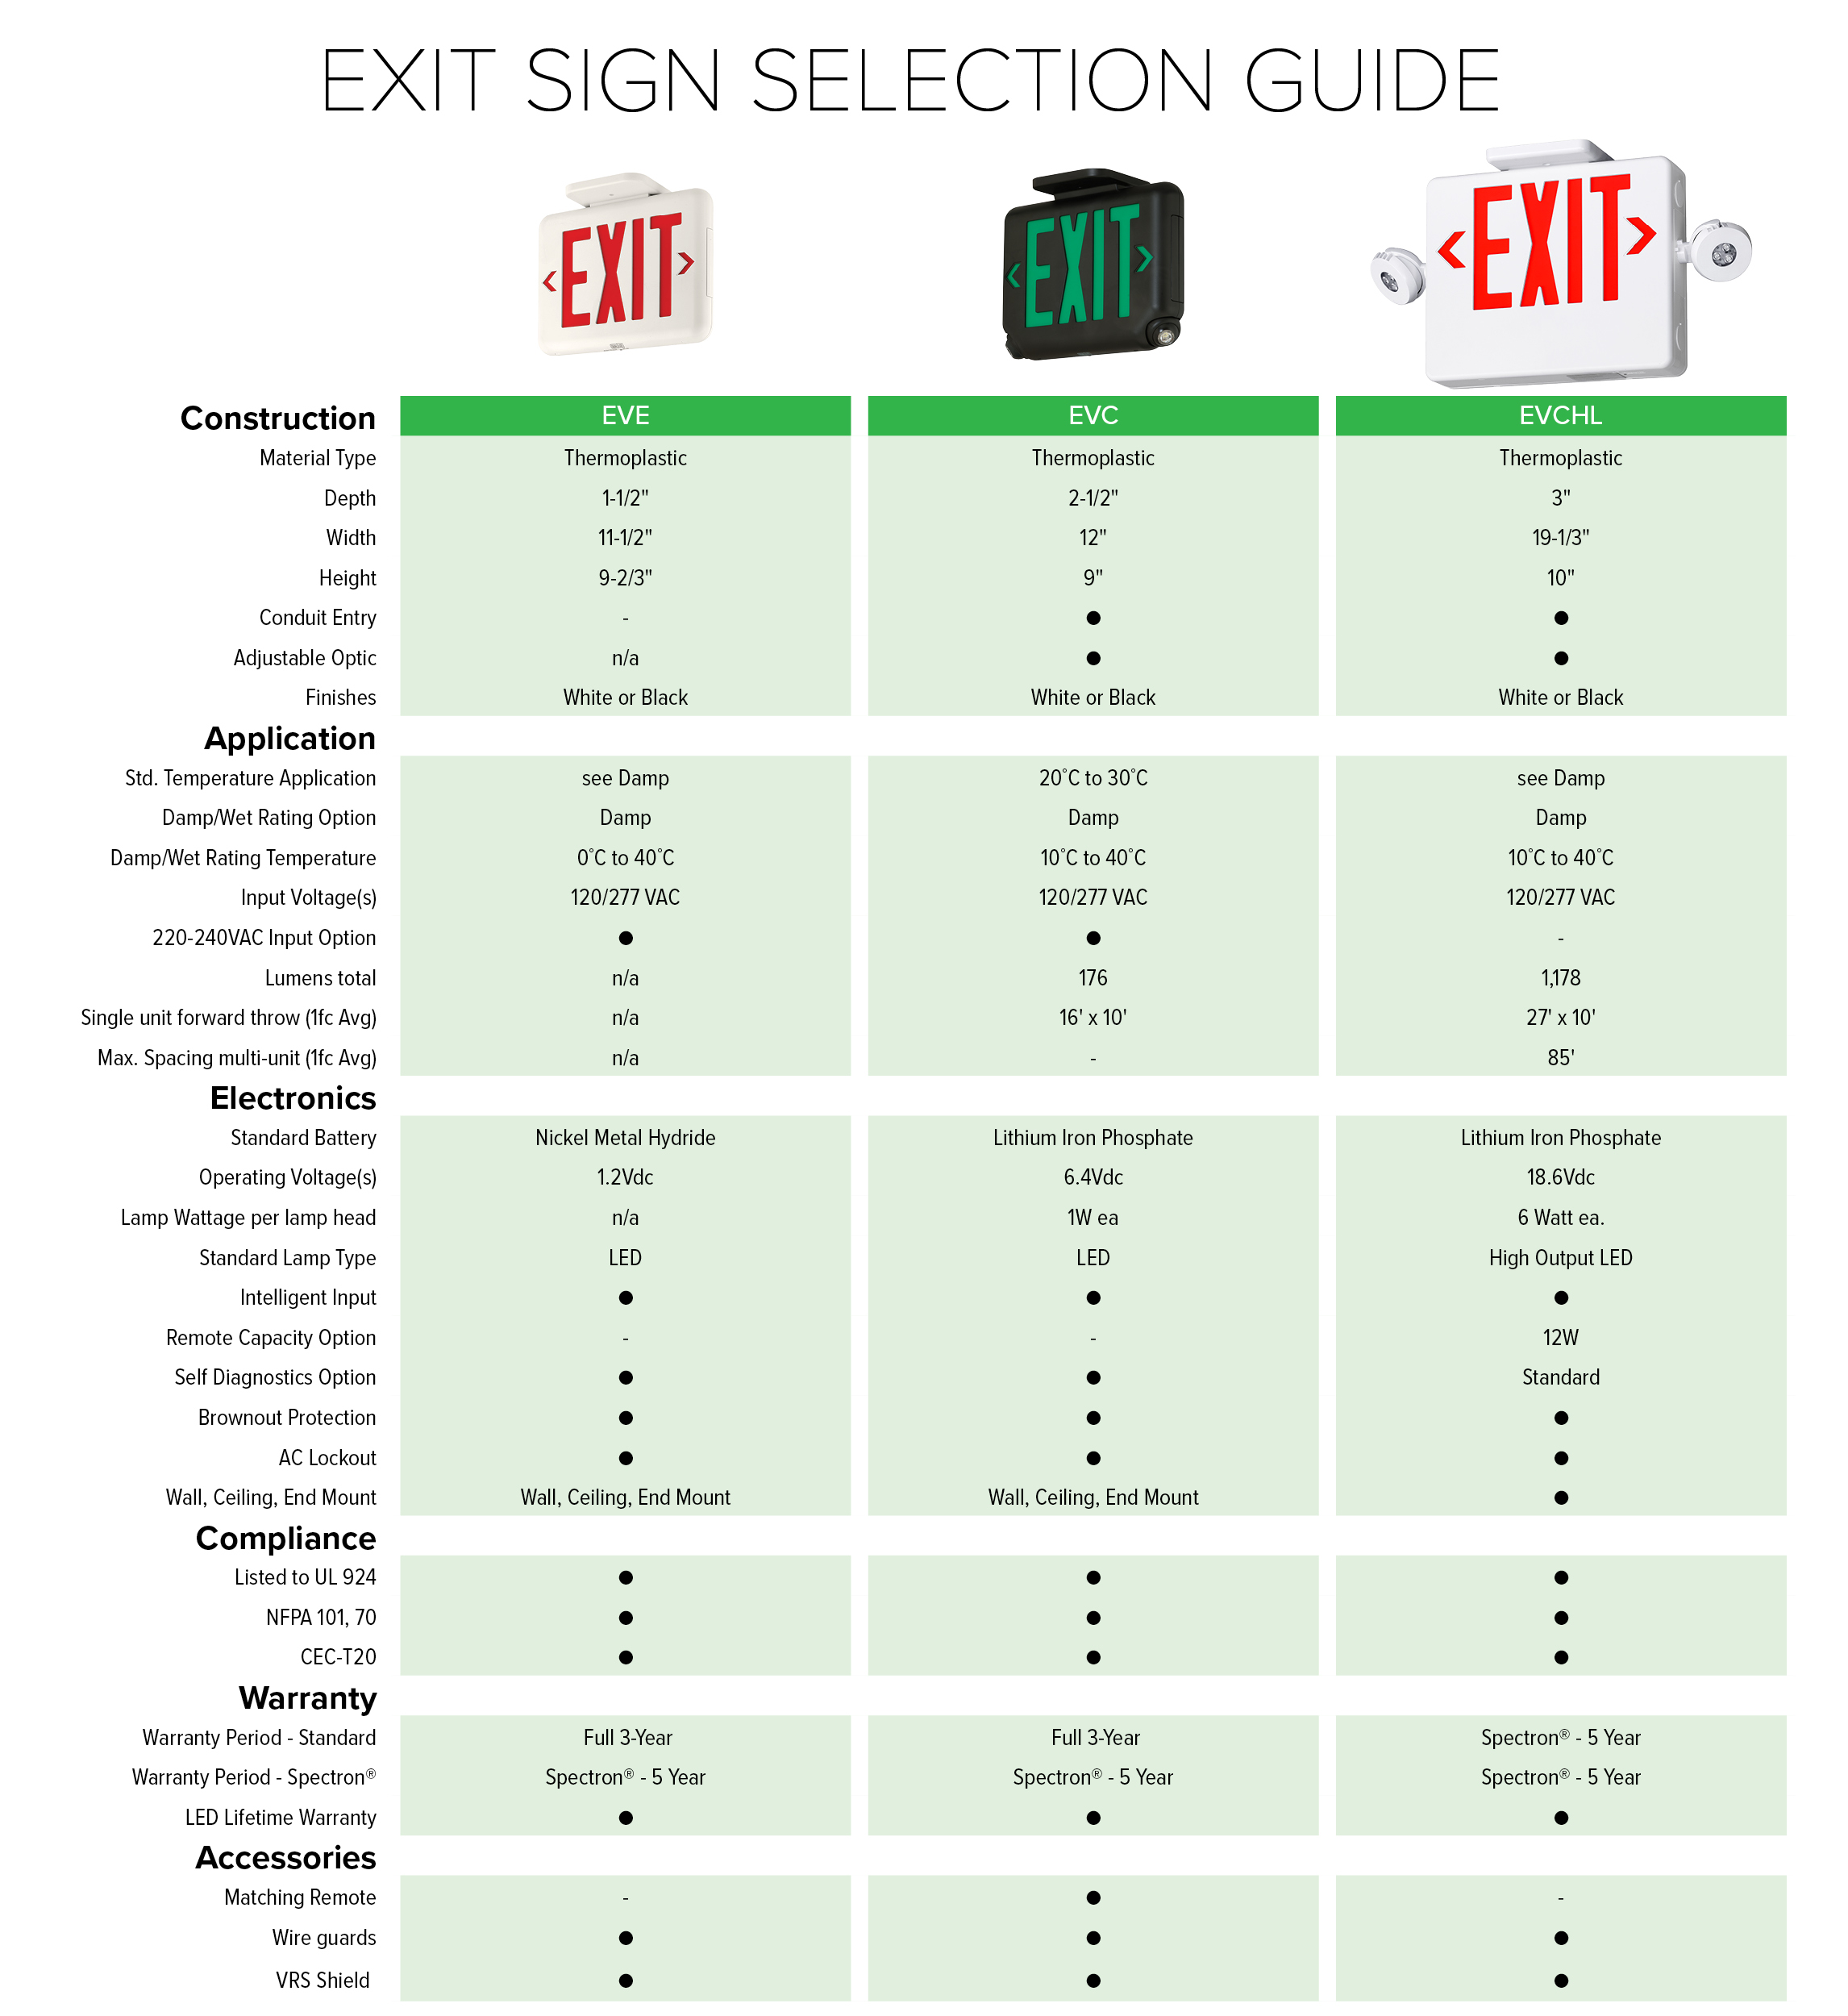 EV Family Exit Selection Guide